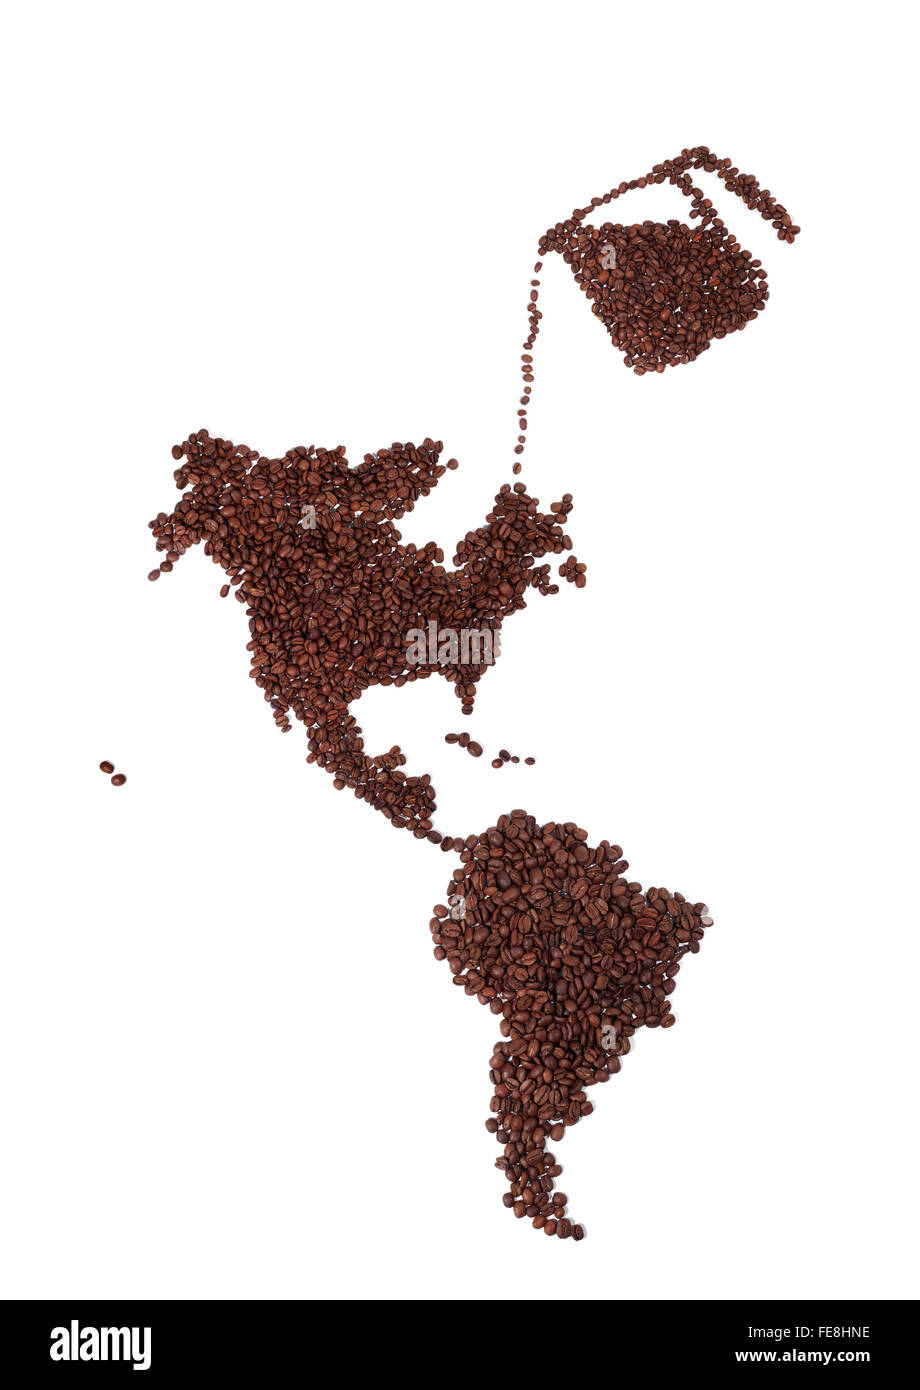 Pot of Coffee Pouring Beans onto a Map of North America all Made of Brown, Fresh Roasted Coffee Beans Stock Photo